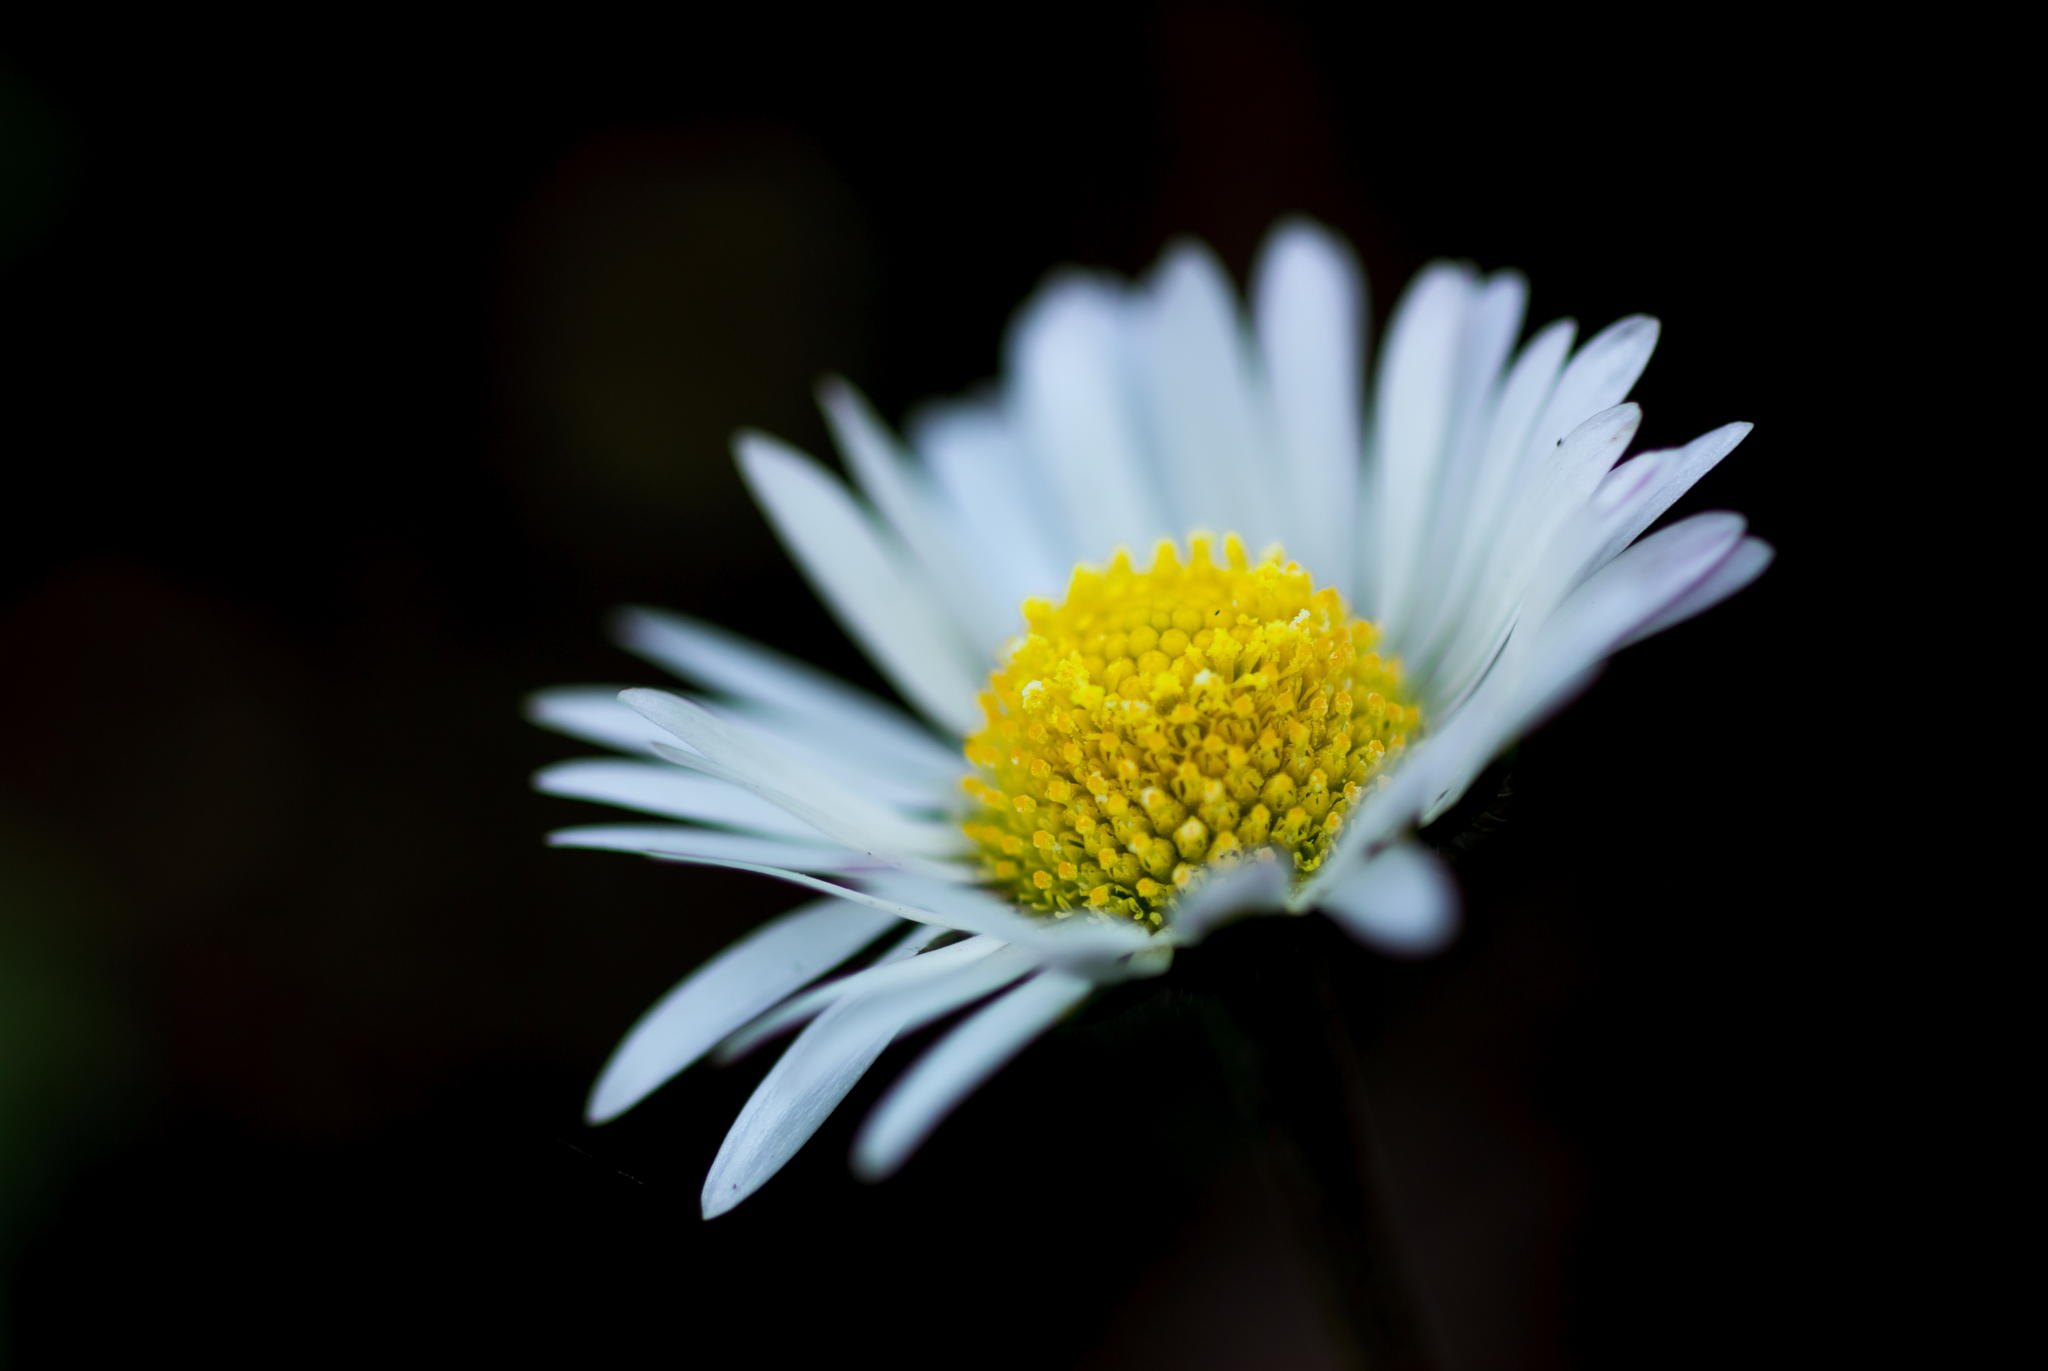 wallpaper picture download,flower,flowering plant,oxeye daisy,daisy,petal